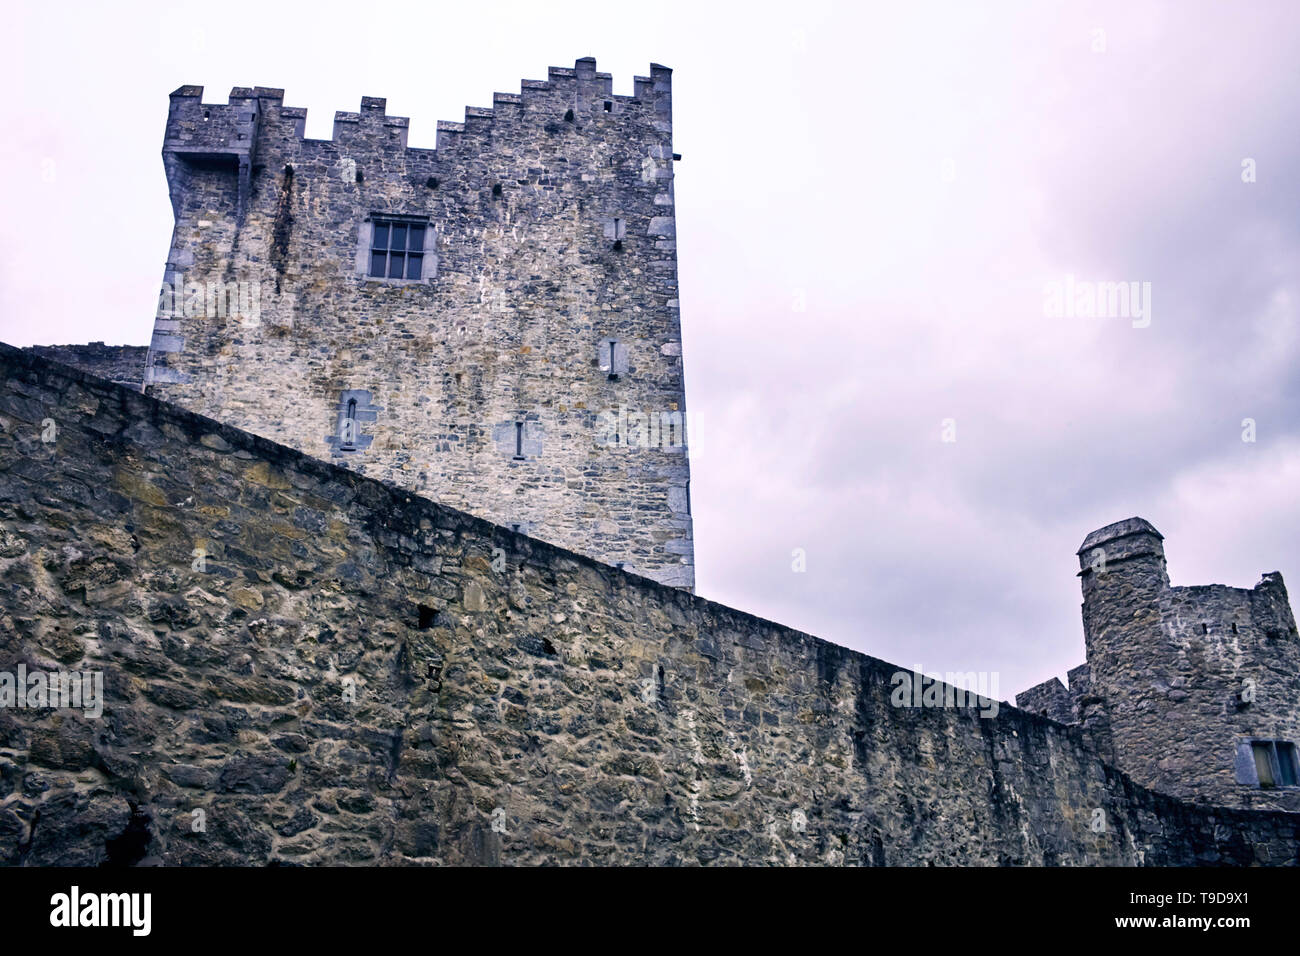 Looking up at the 15th century tower house of Ross Castle at Lough Leane, Killarney, Ireland Stock Photo